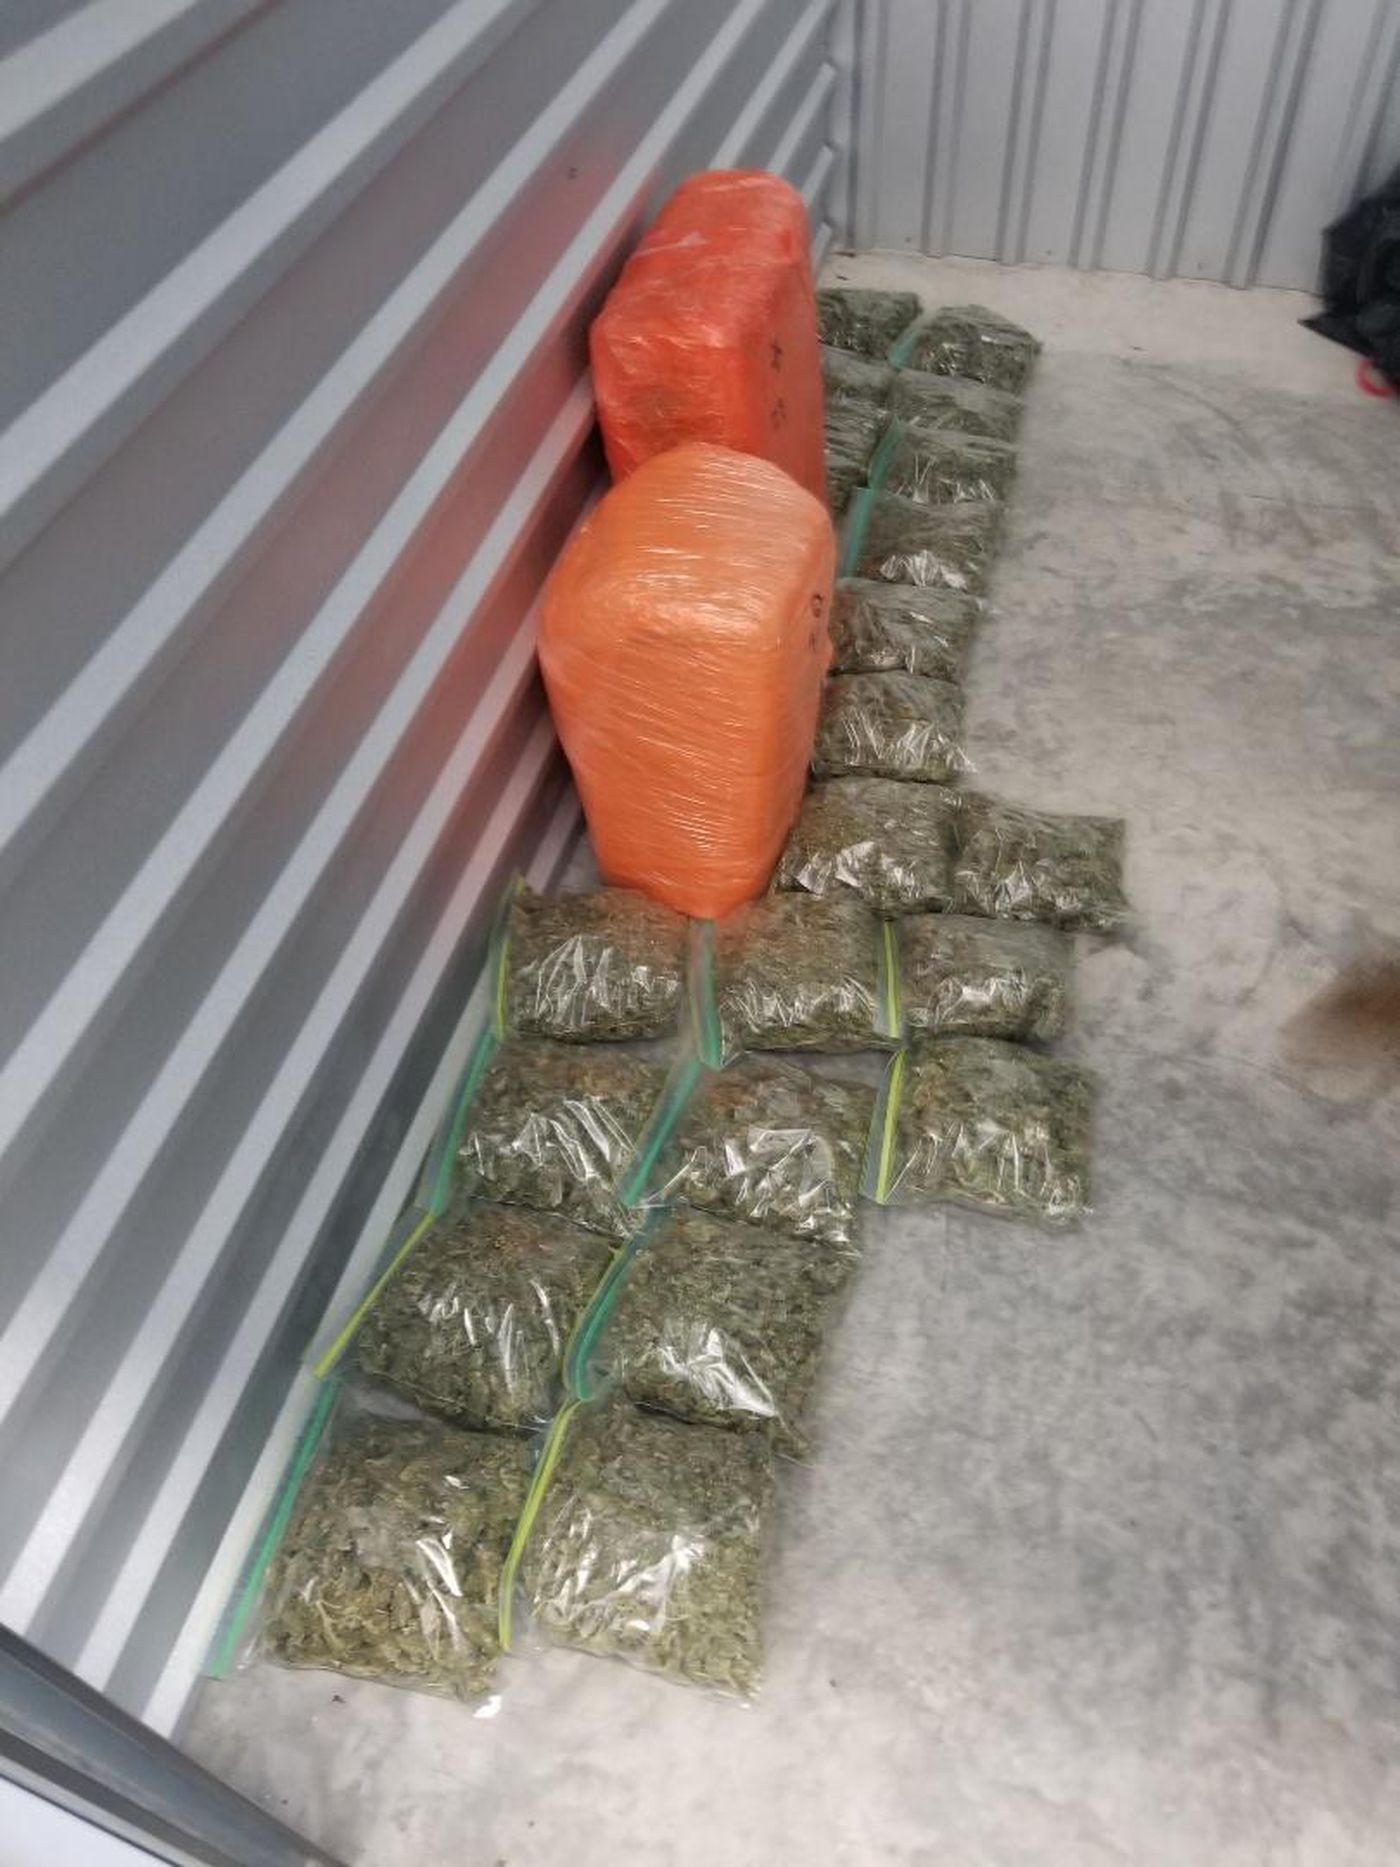 Over 80 pounds of marijuana along with cocaine, meth, and firearms were seized in Yazoo County's largest drug bust. Source: Yazoo County Sheriff's Department